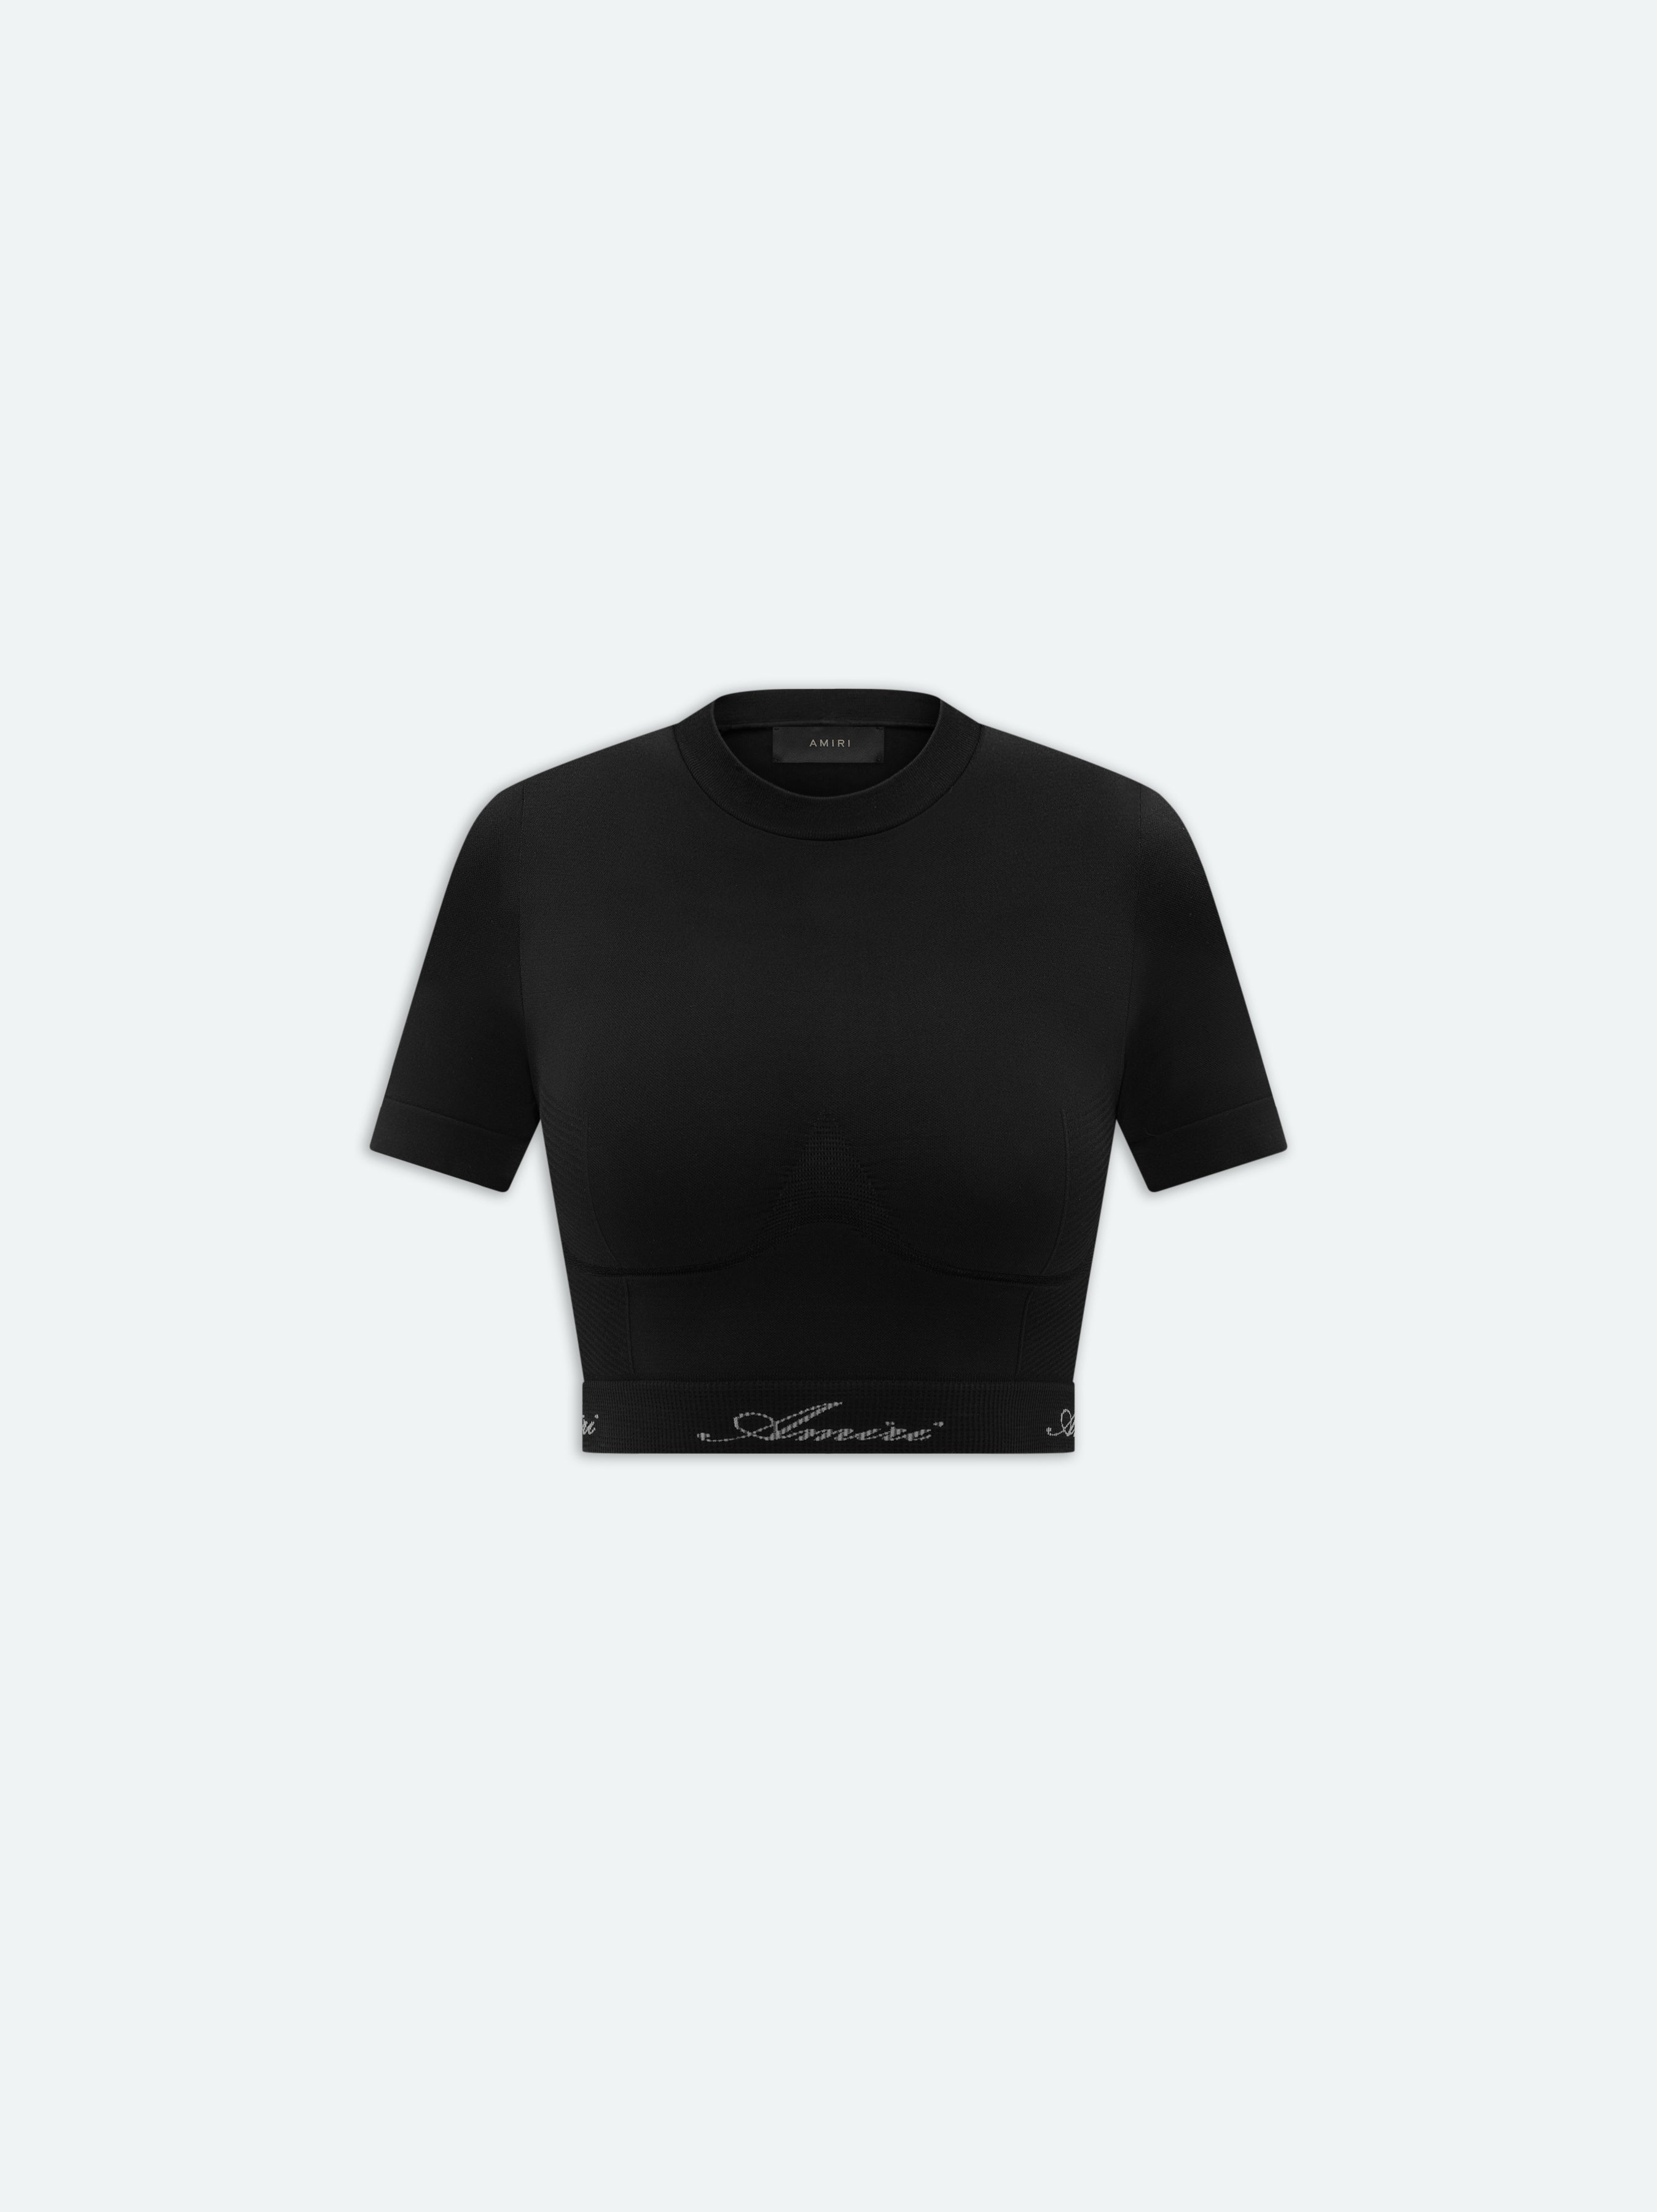 Product WOMEN - SEAMLESS S/S TOP - Black featured image